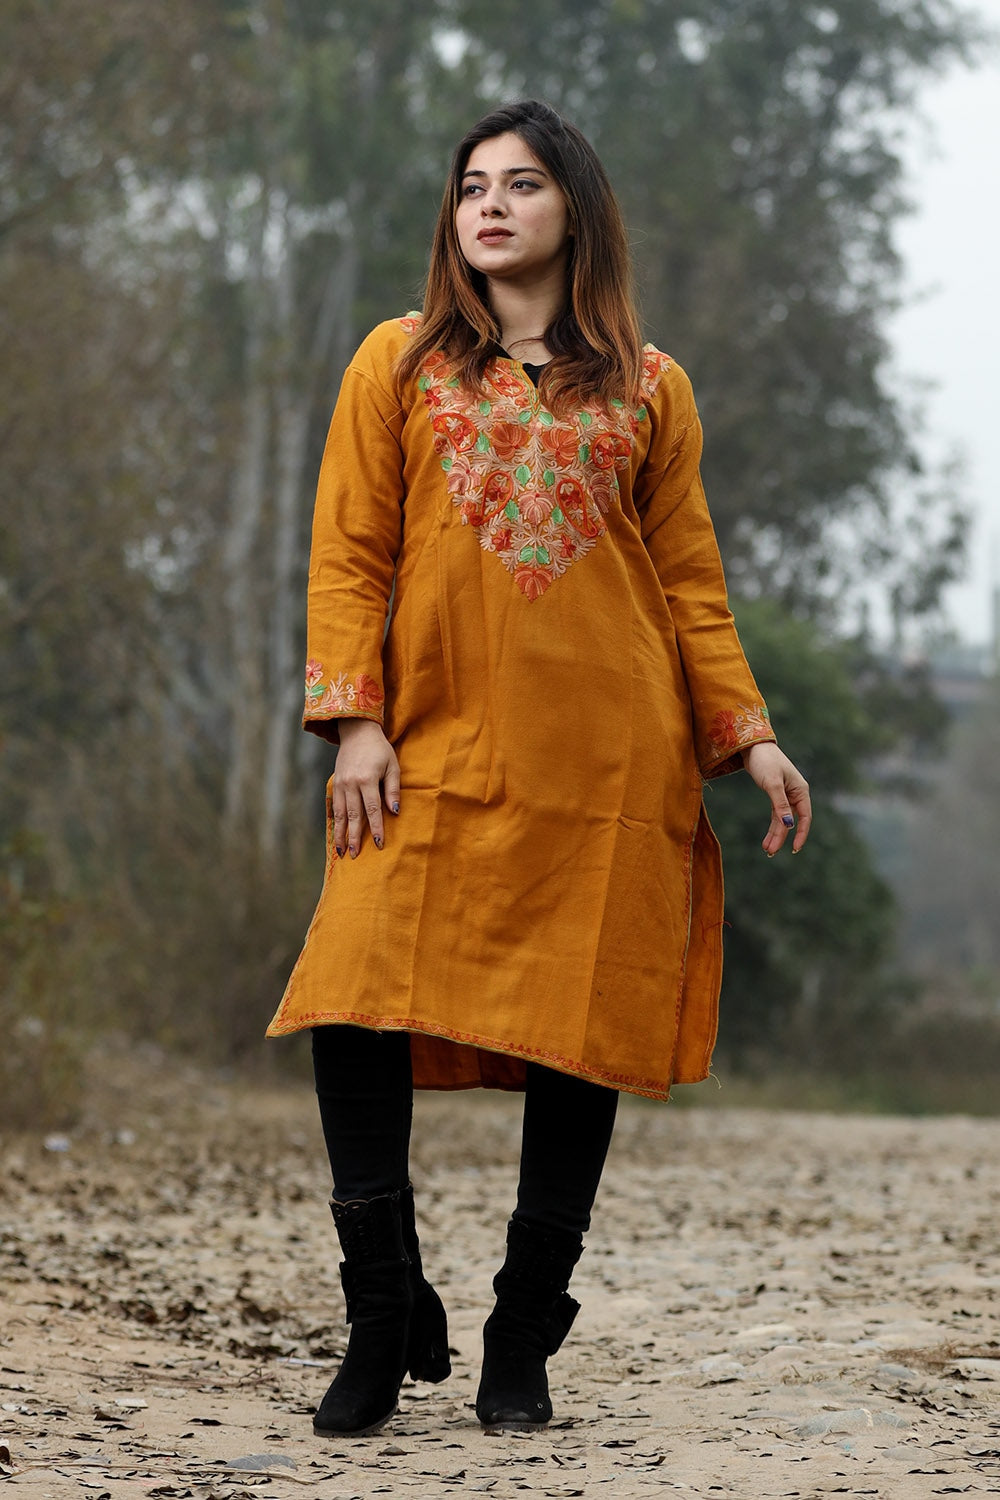 Mustard Hand Embroidery Kurtis Online Shopping for Women at Low Prices